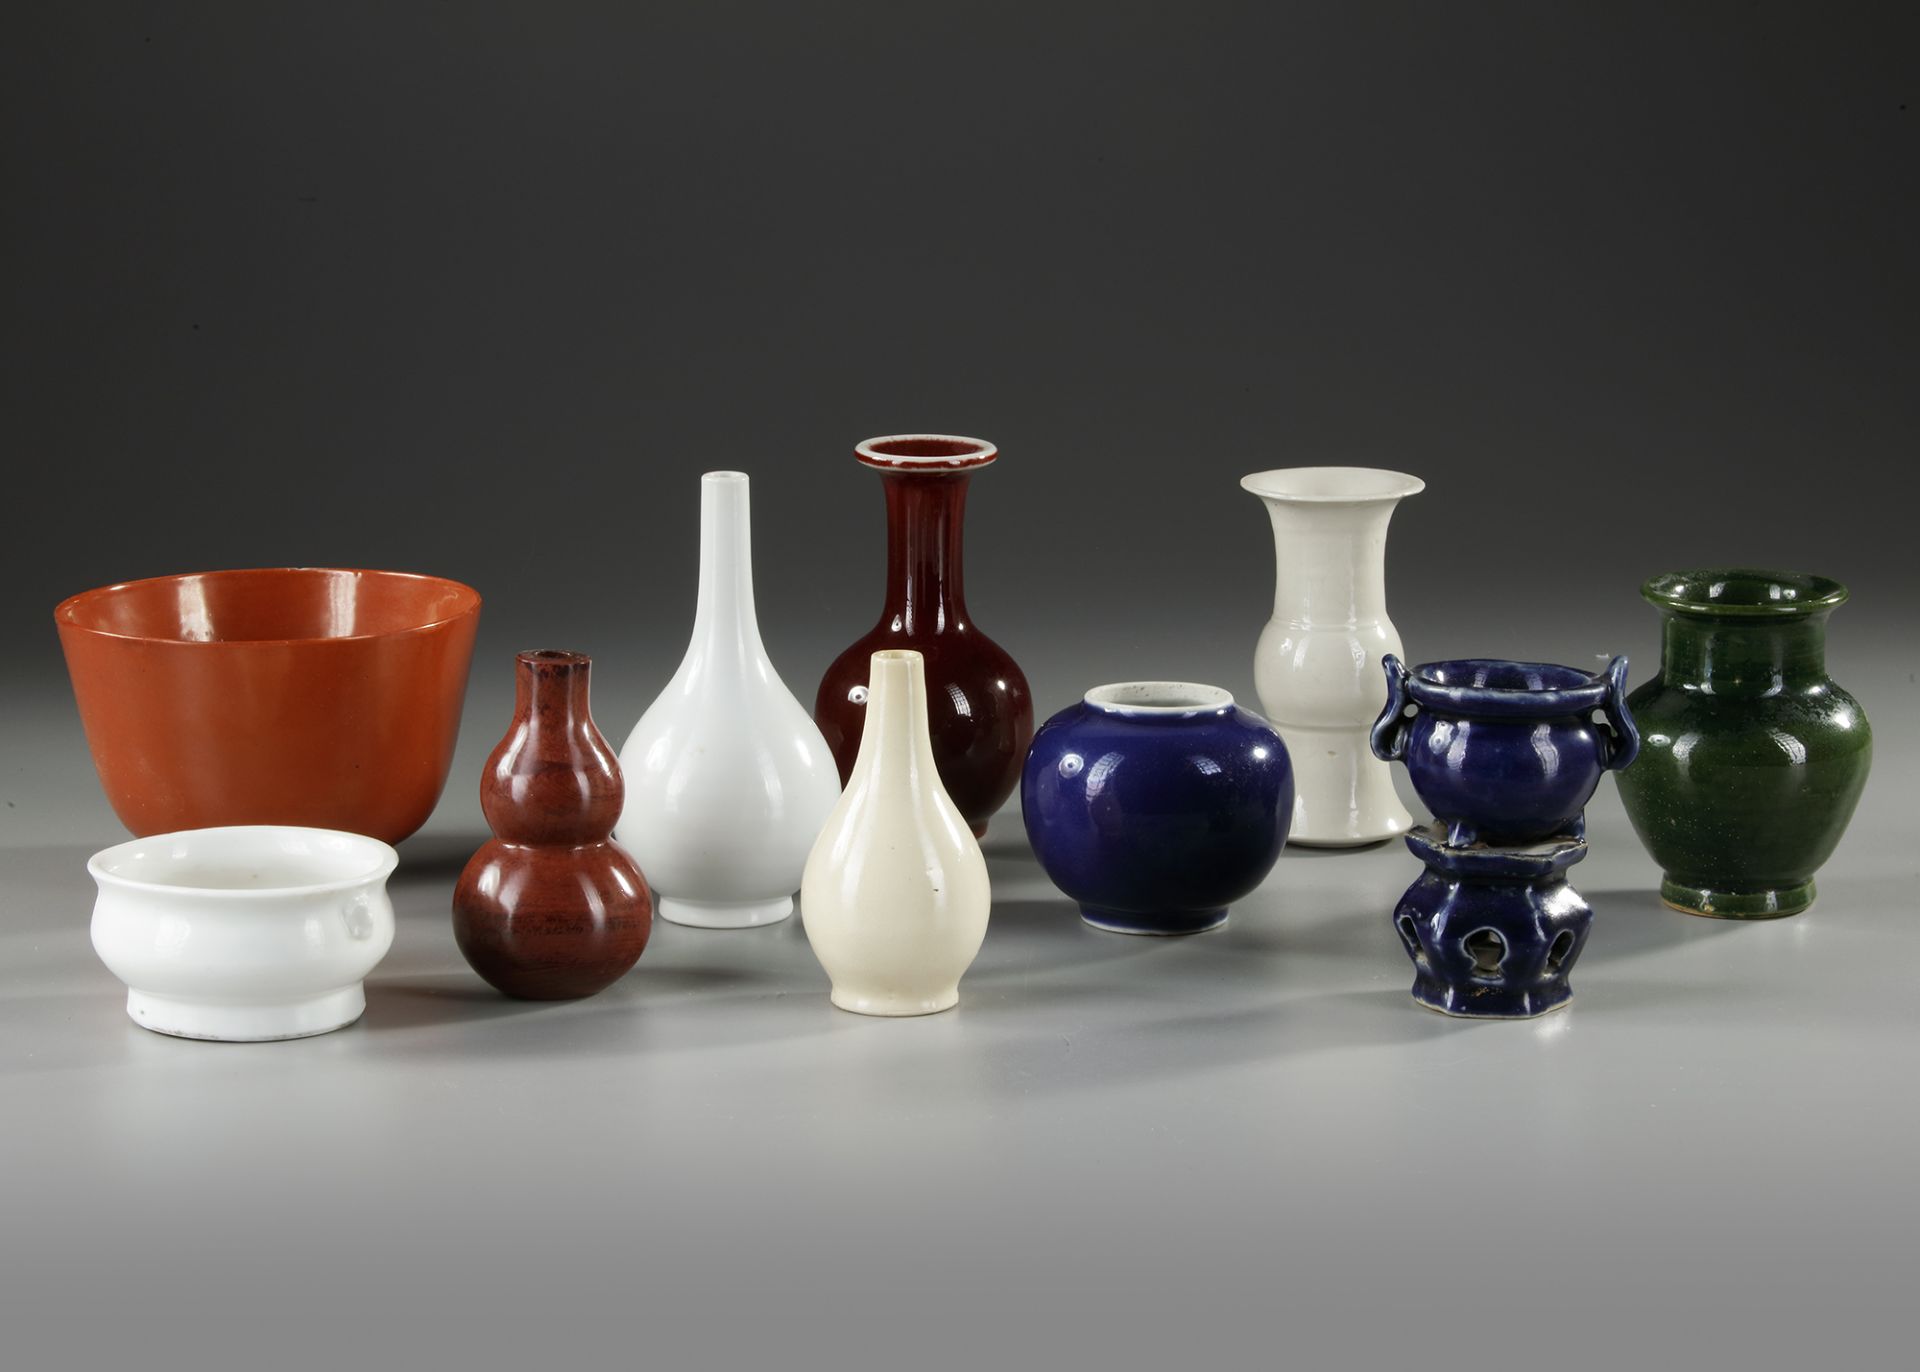 A CHINESE COLLECTION OF 10 MONOCHROME GLAZED PORCELAIN VESSELS, 19TH CENTURY AND LATER - Image 2 of 3